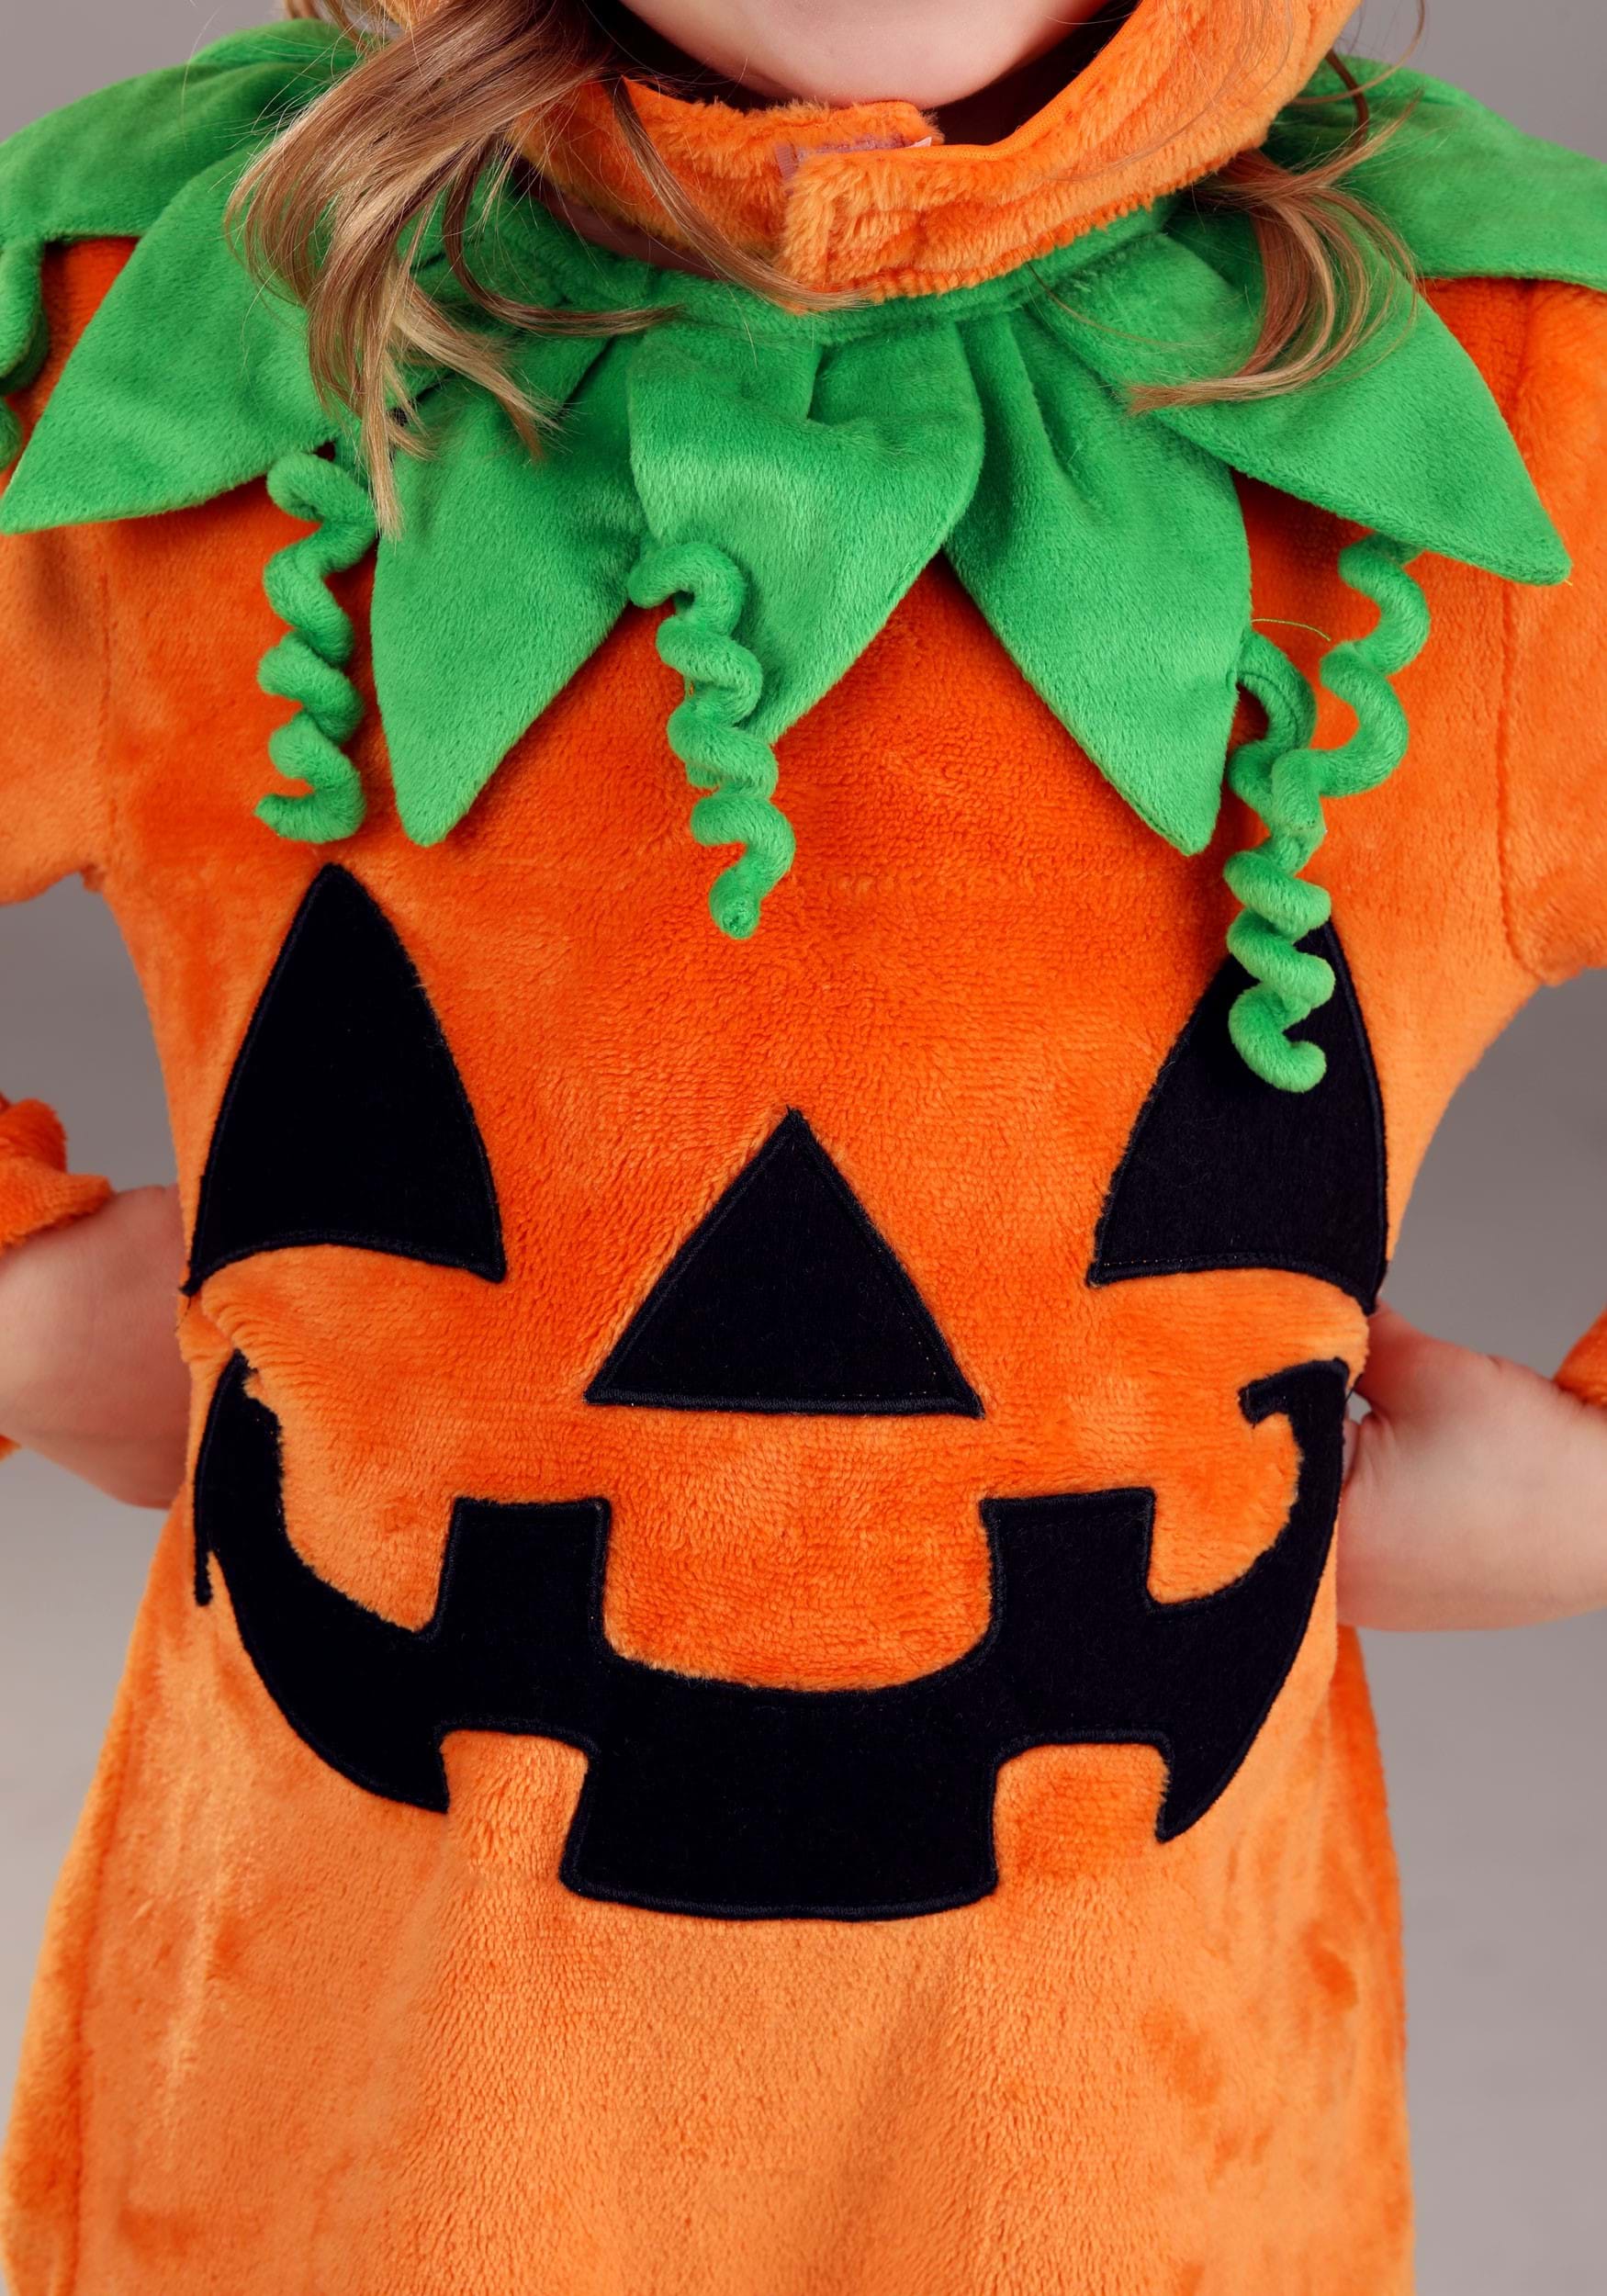 Prize Pumpkin Costume For Toddlers